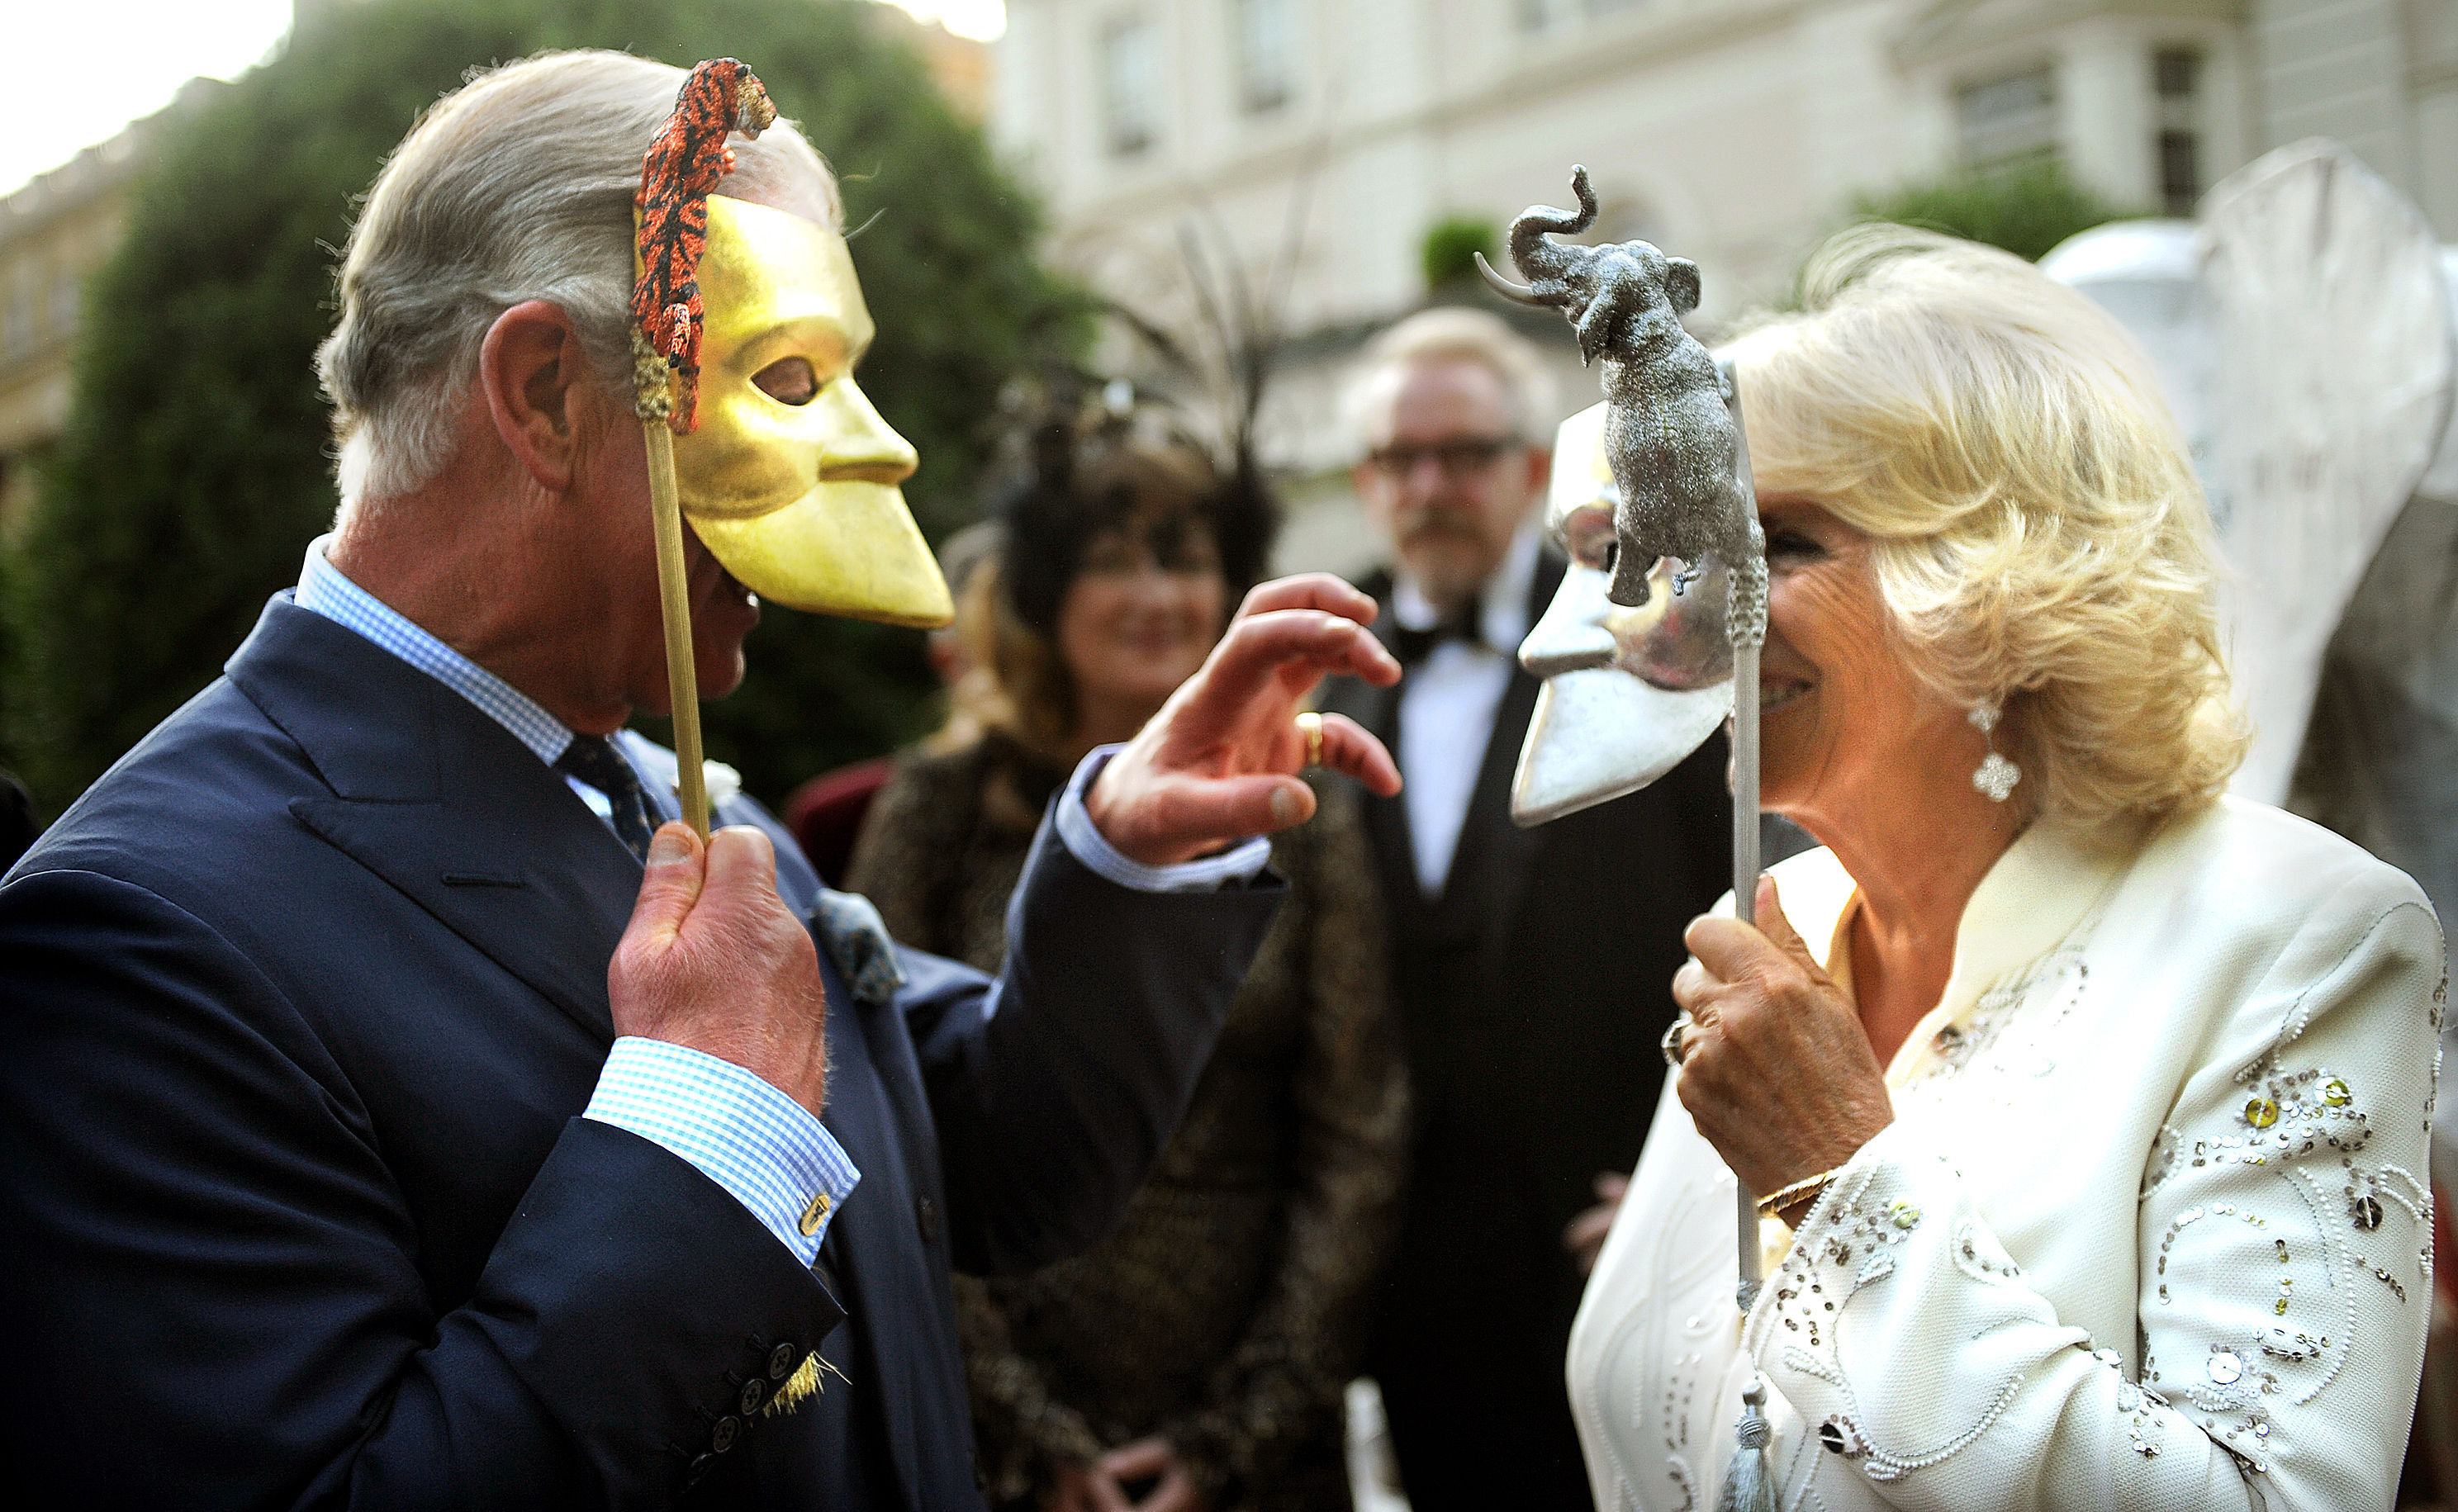 The then-Prince of Wales and Duchess of Cornwall hosting a reception for the Elephant Family charity in 2013 